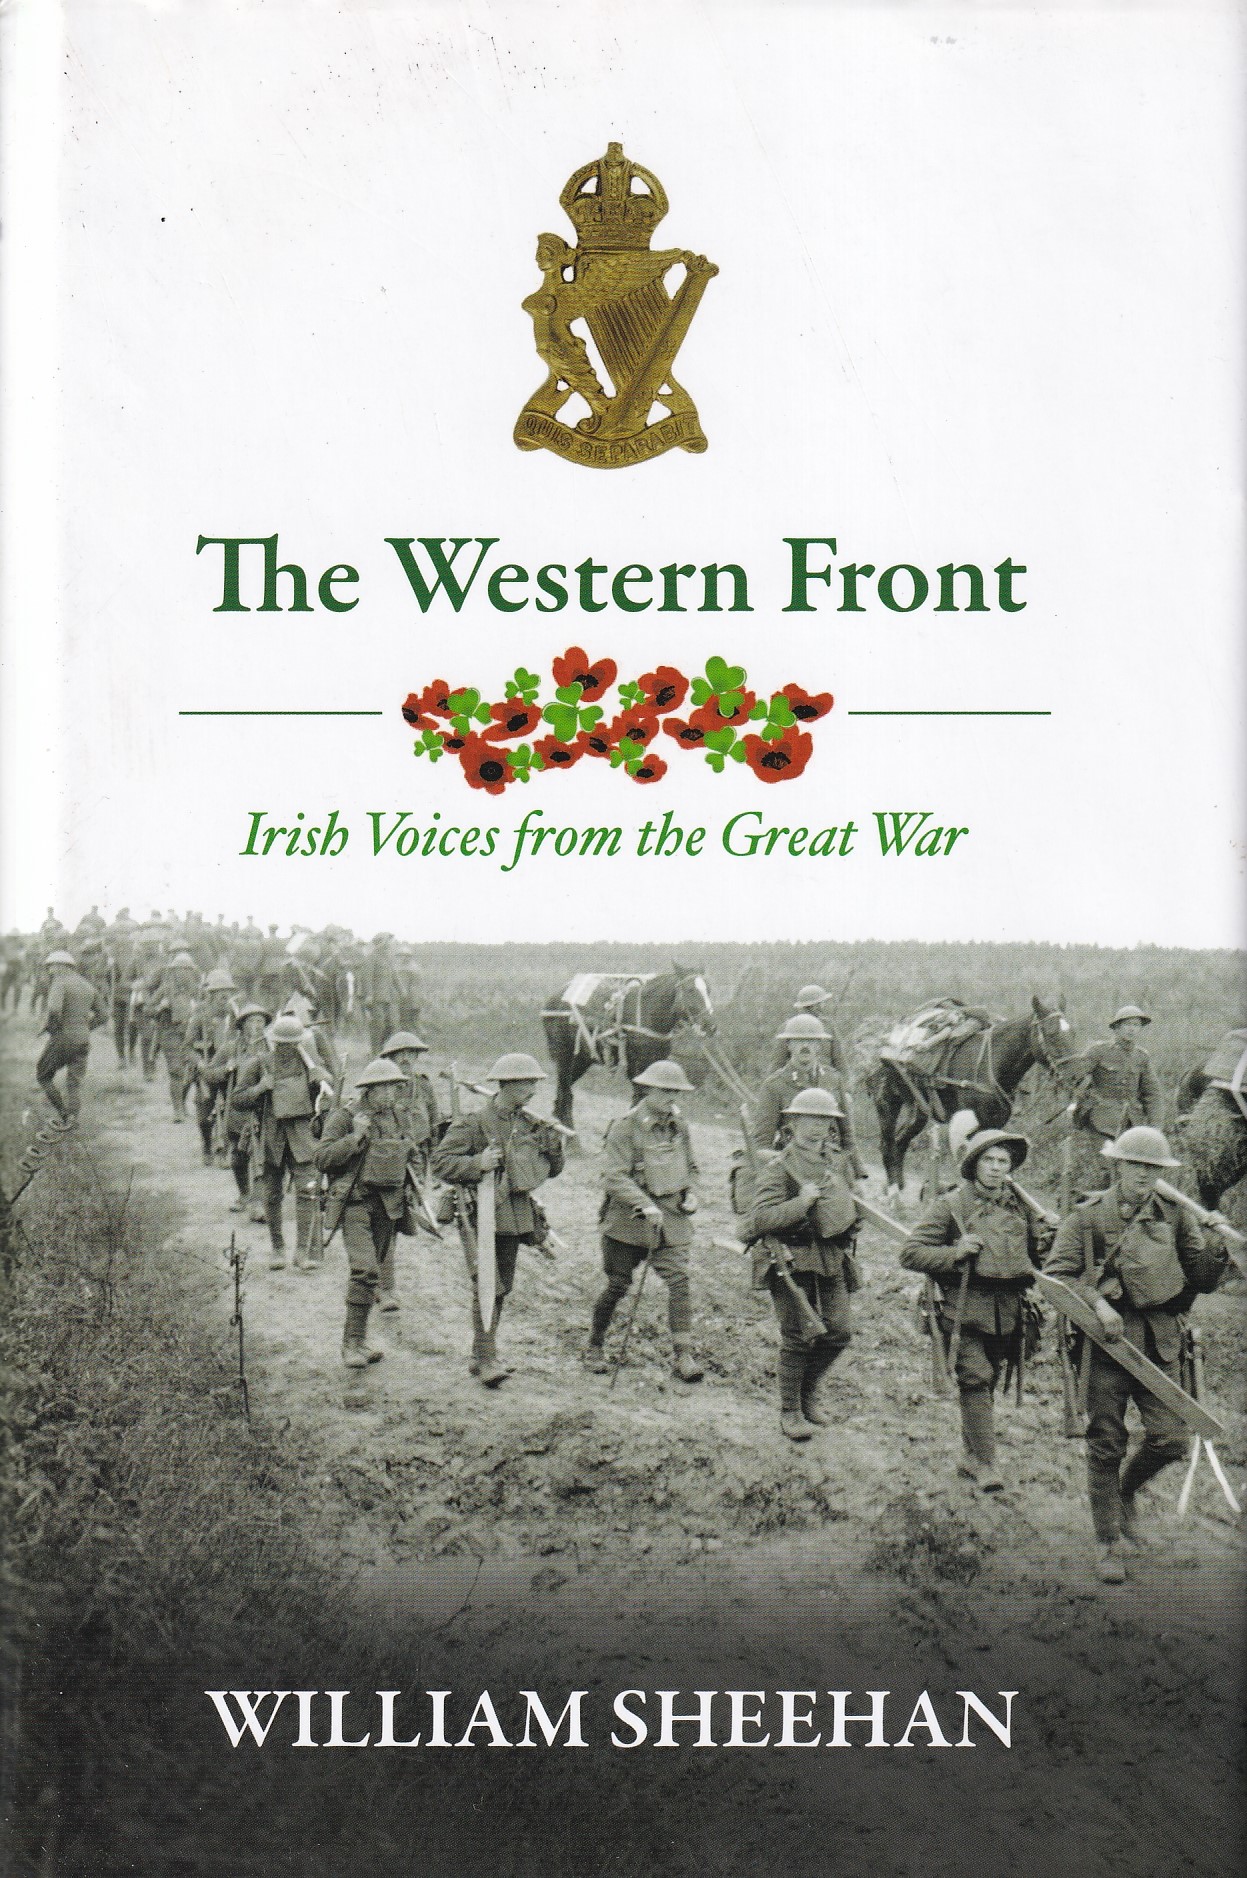 The Western Front: Irish Voices from the Great War | William Sheehan | Charlie Byrne's